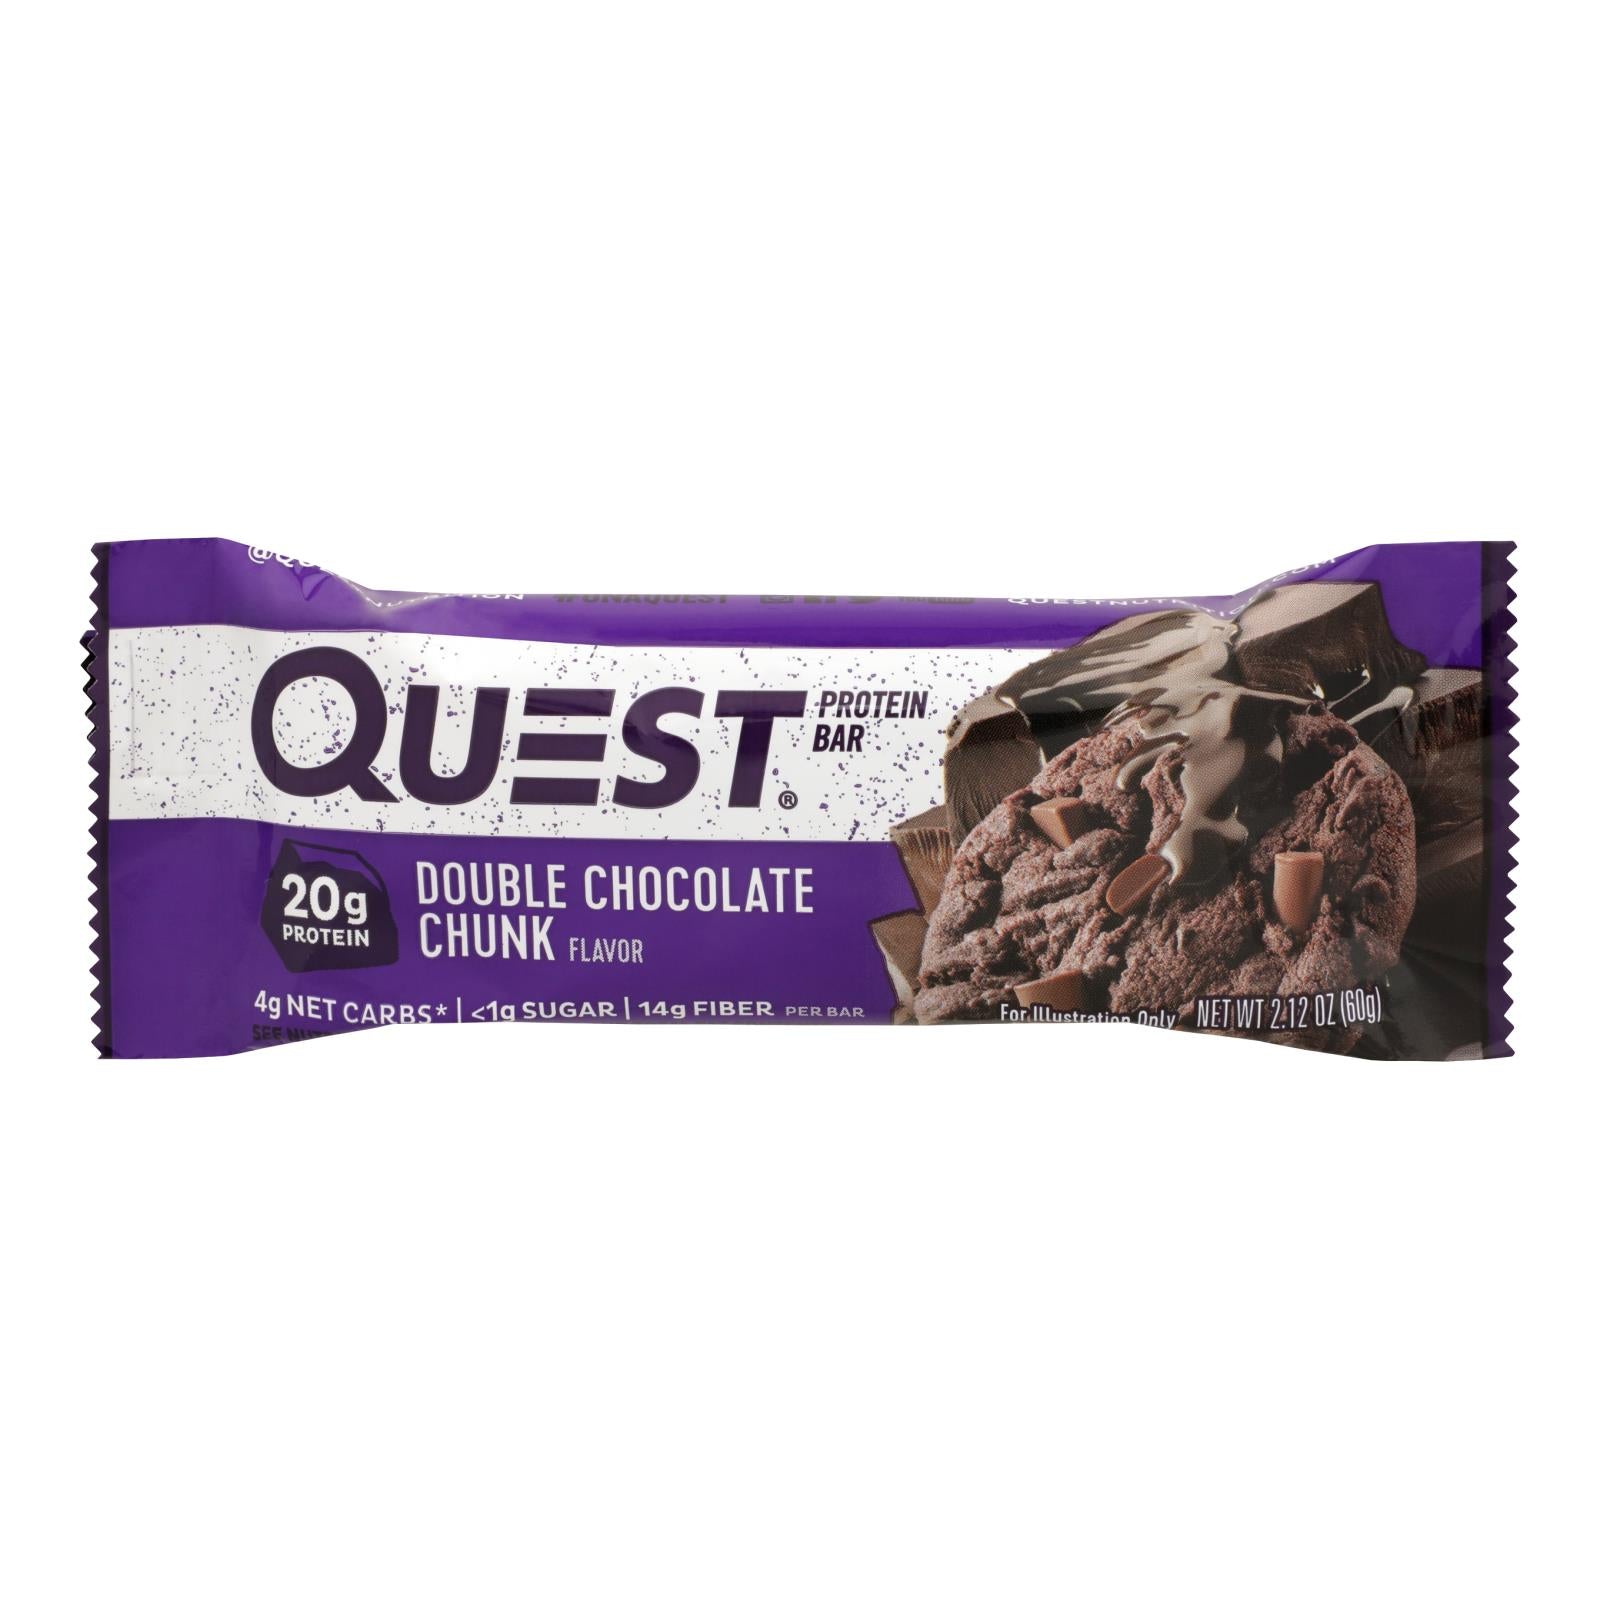 Quest Bar - Double Chocolate Chunk - 2.12 oz - case of 12